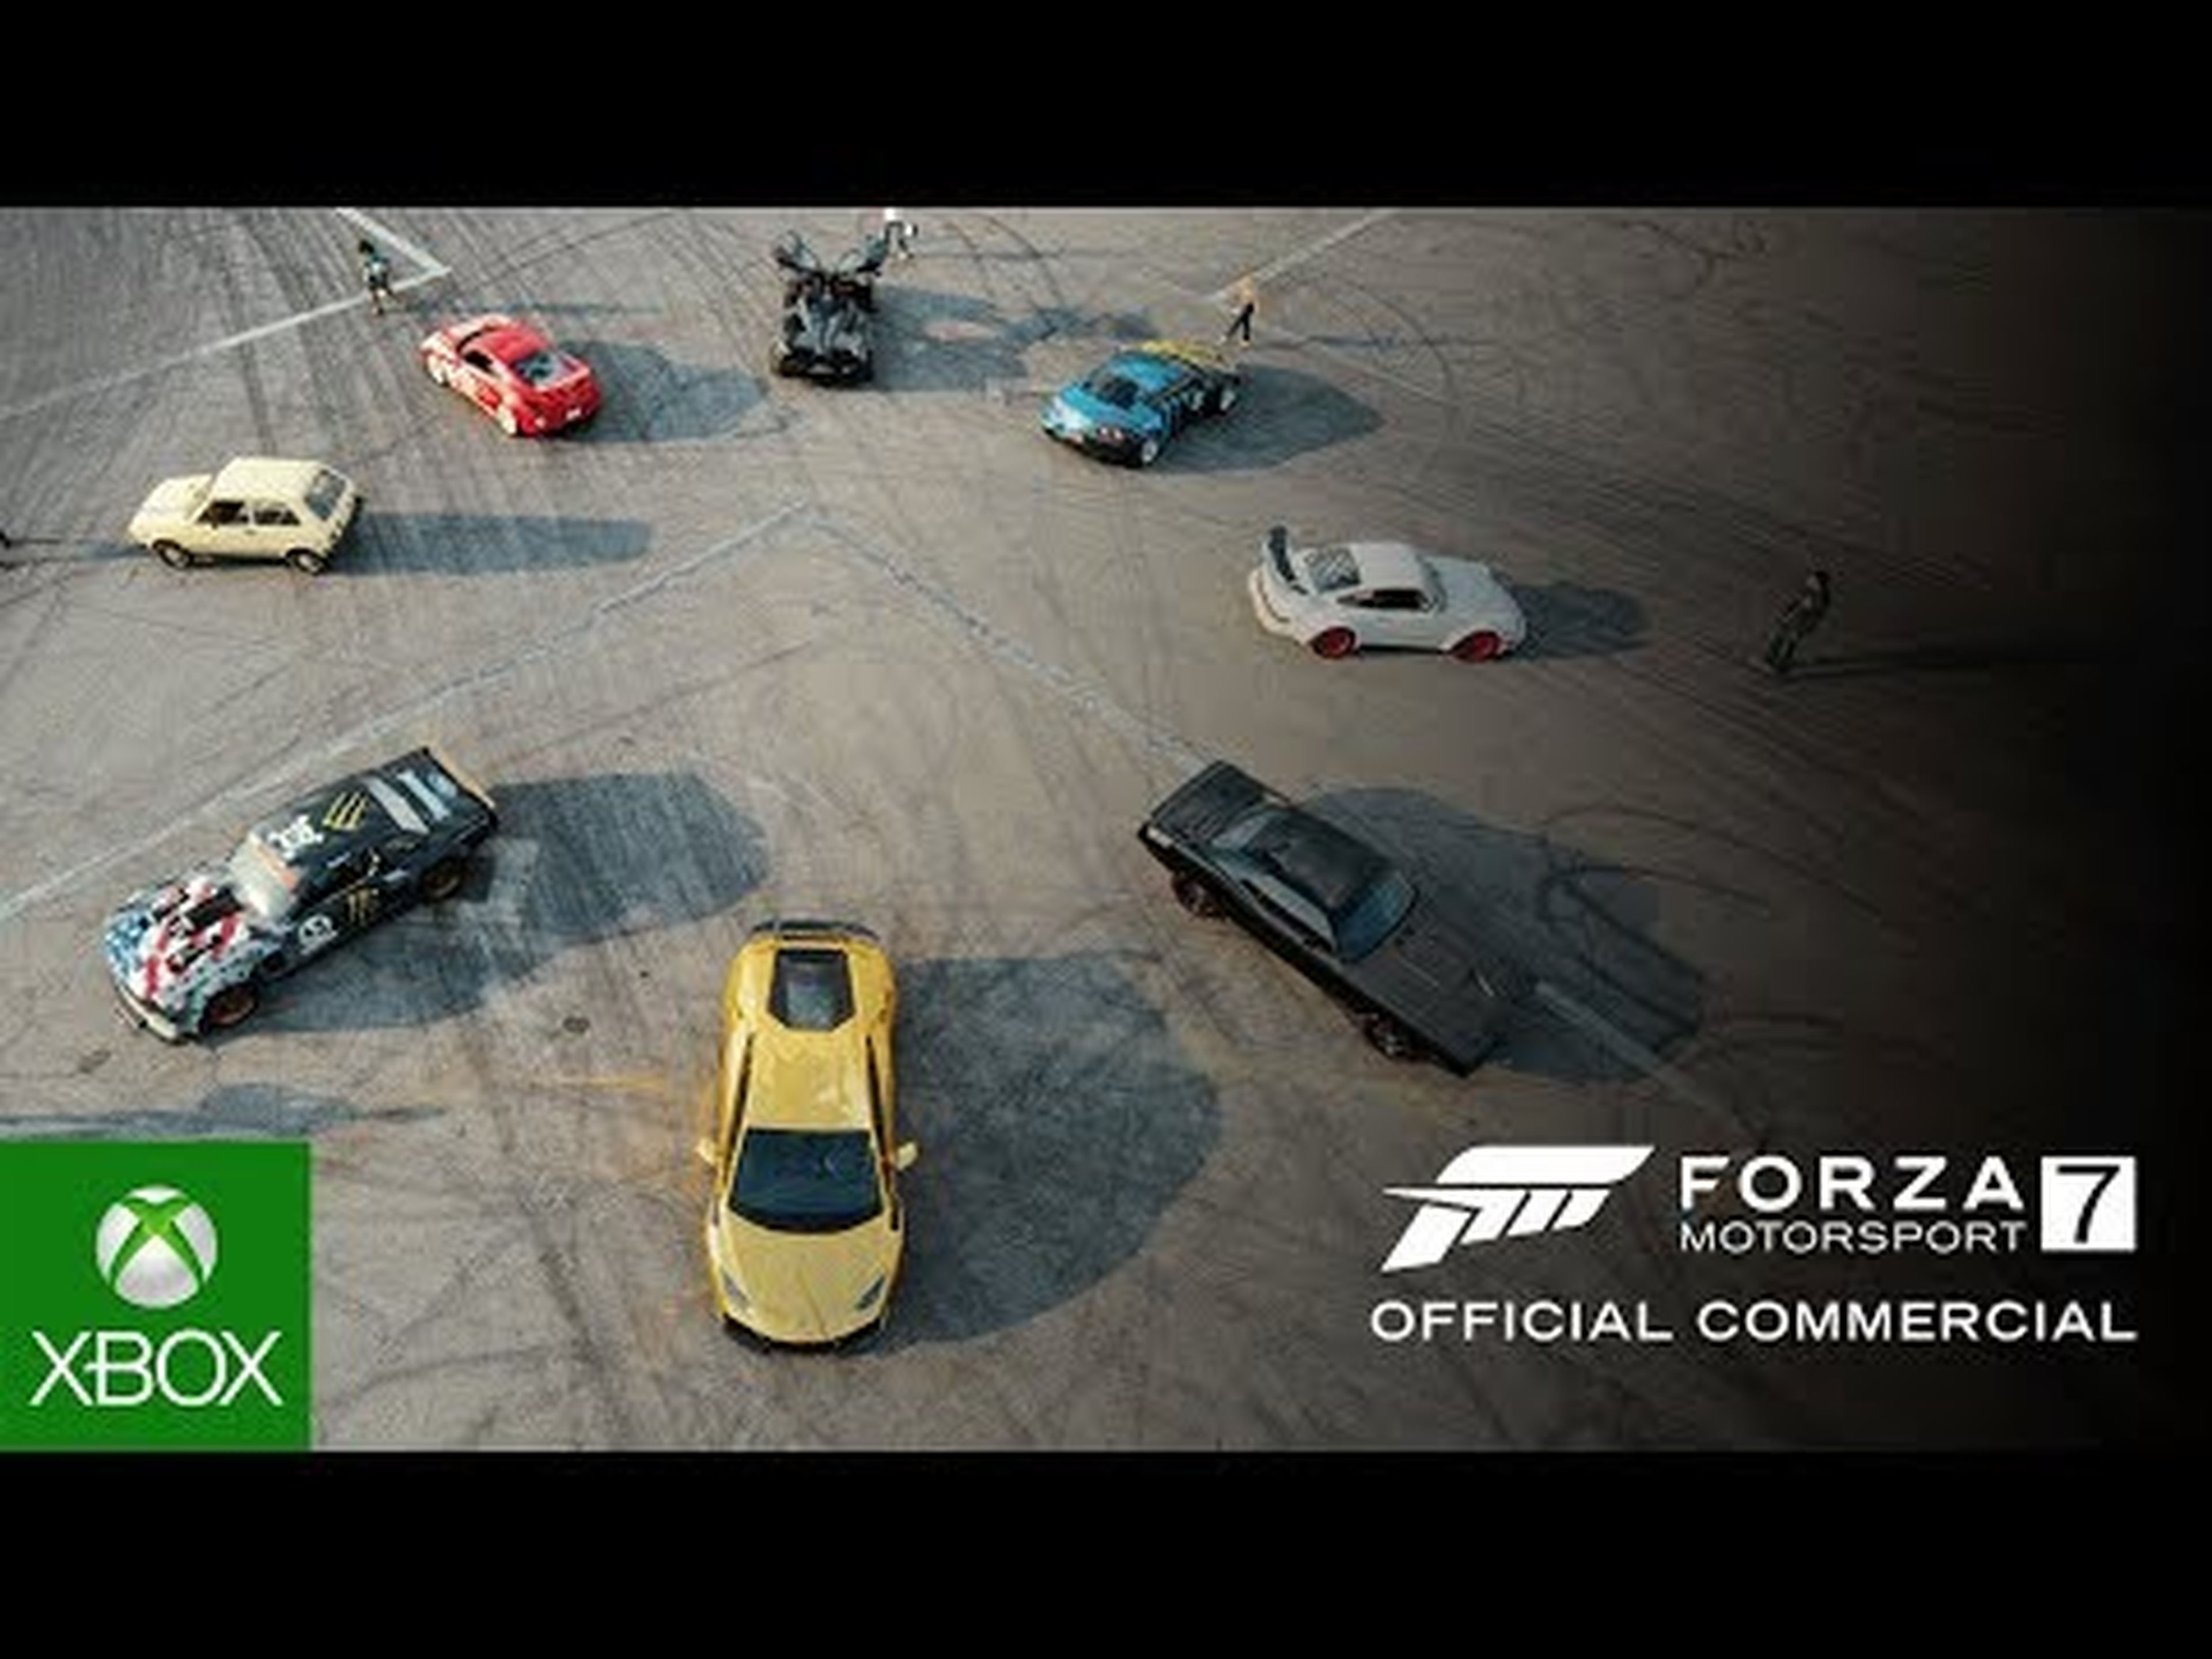 Forza Motorsport 7 Official Commercial